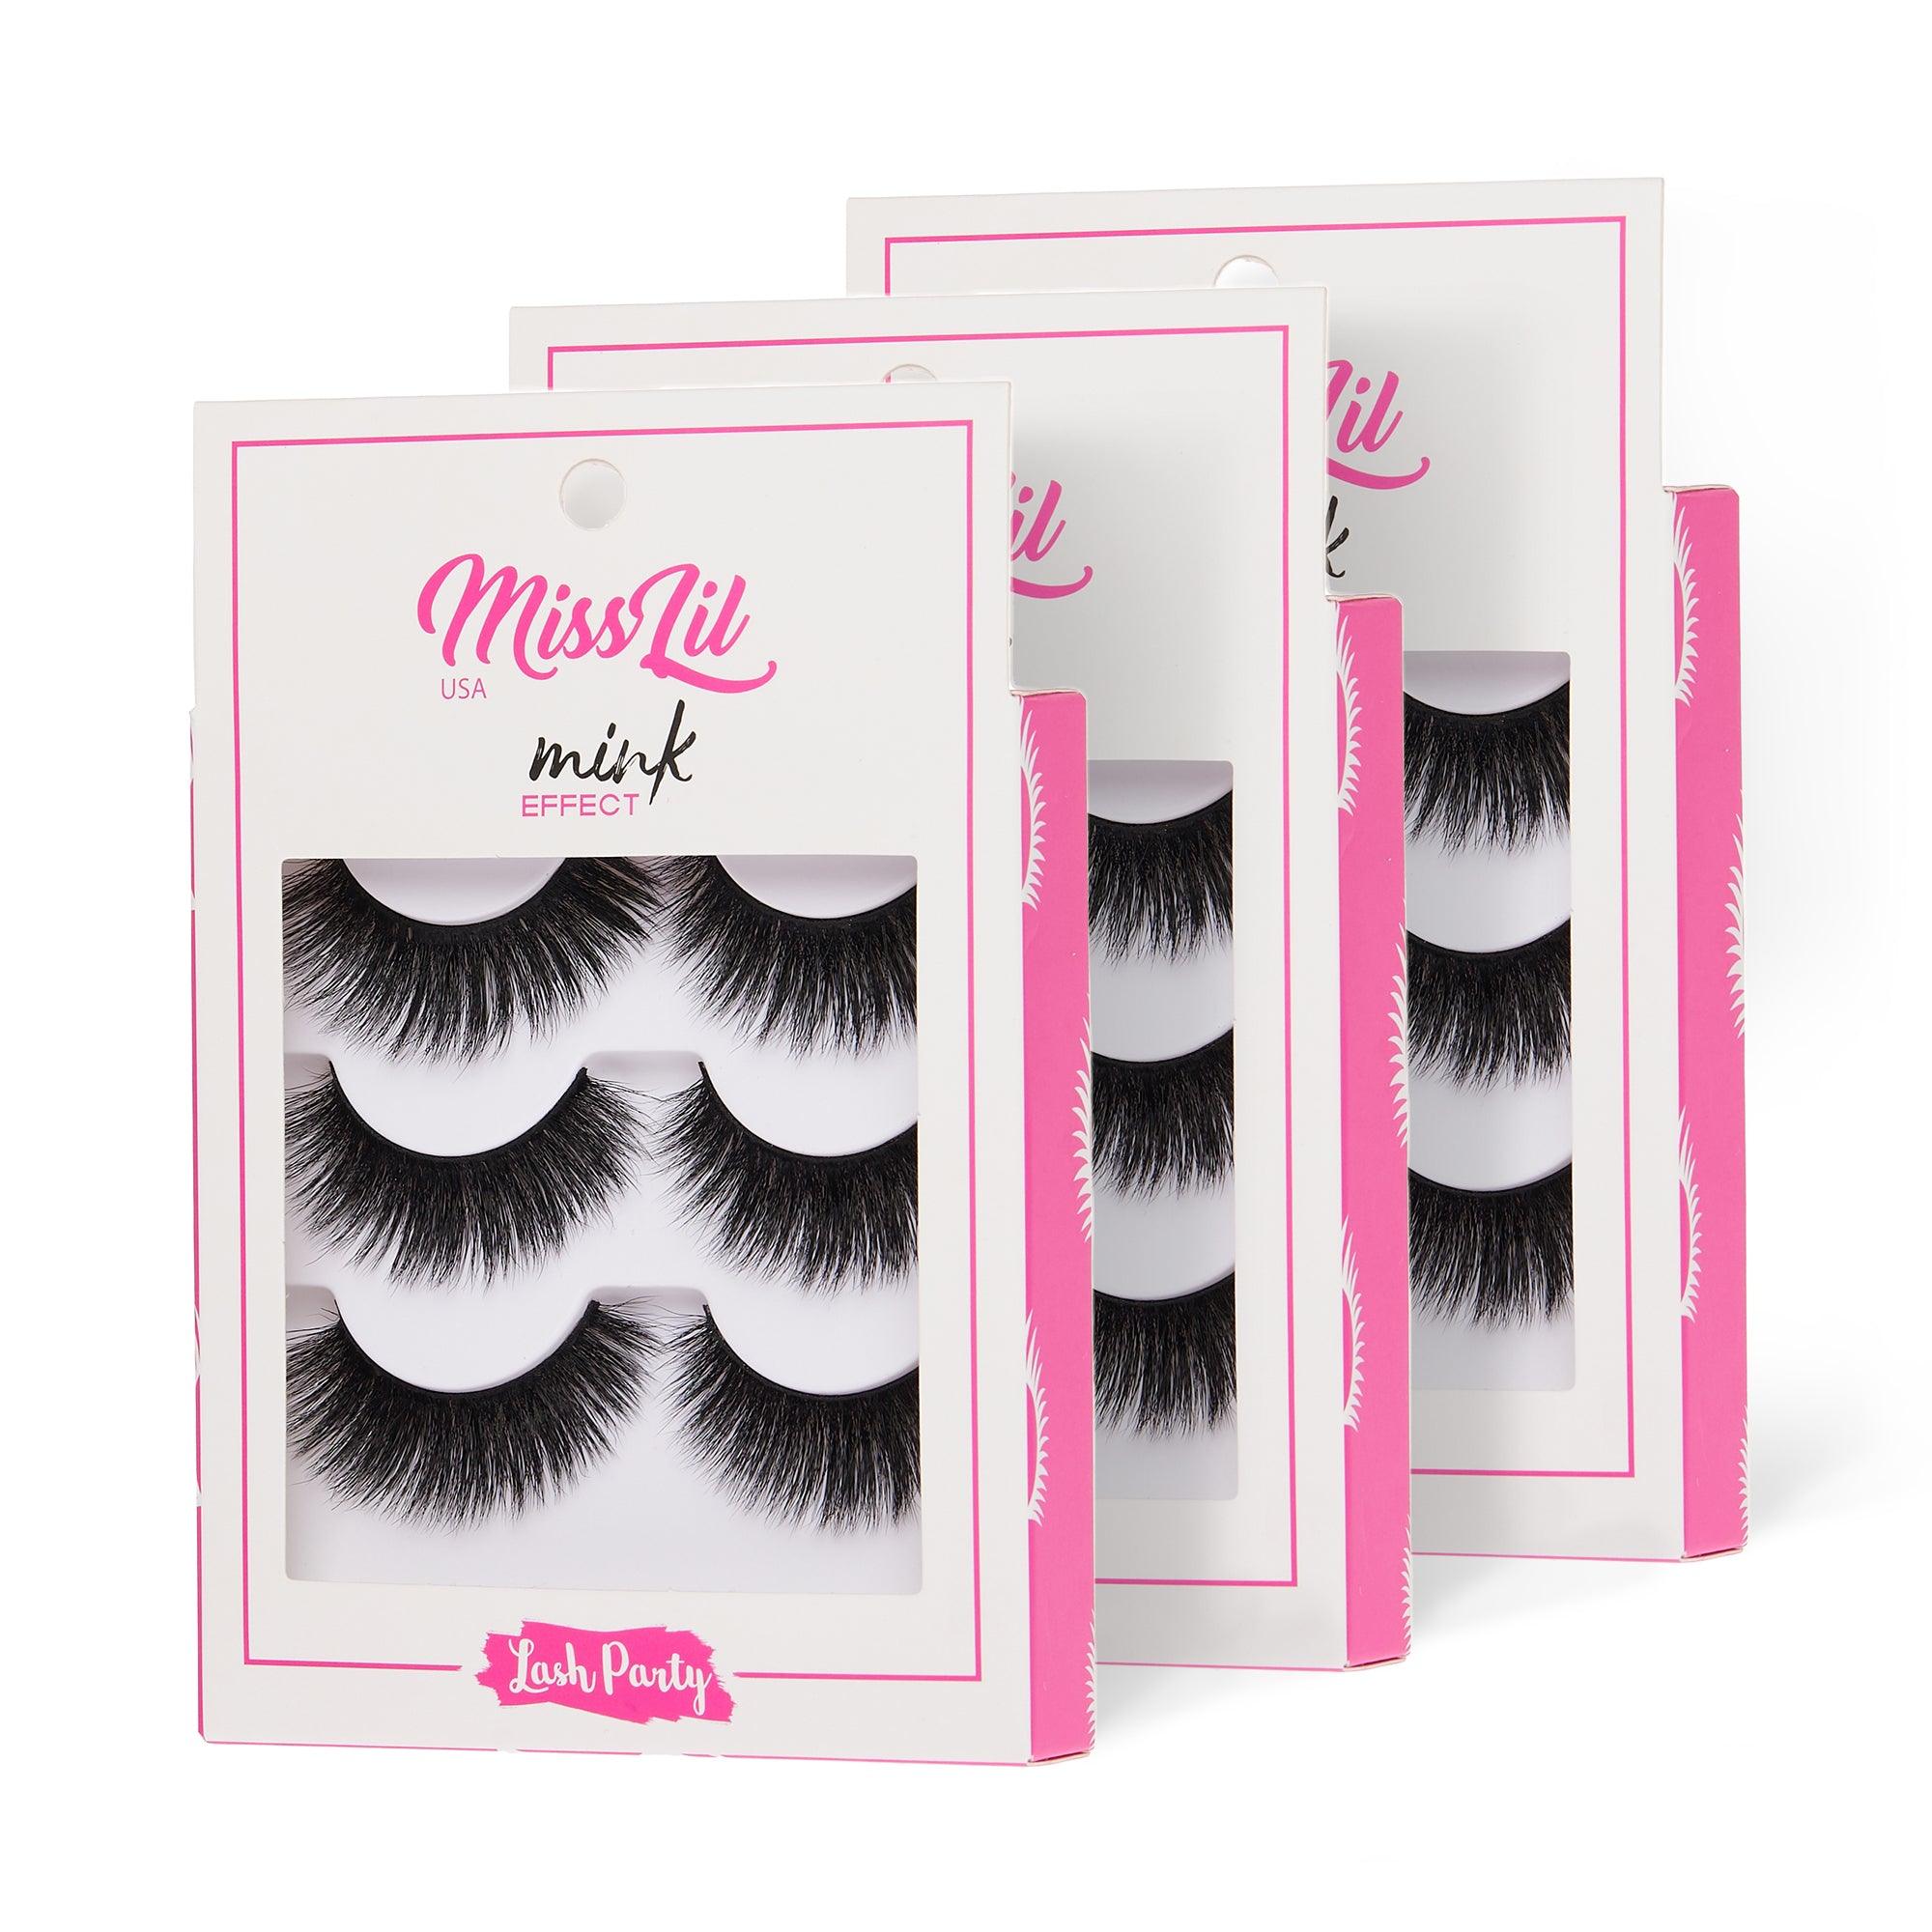 3-Pair Eyelashes - Lash Party Collection #9 ( Pack of 12) - Miss Lil USA Wholesale